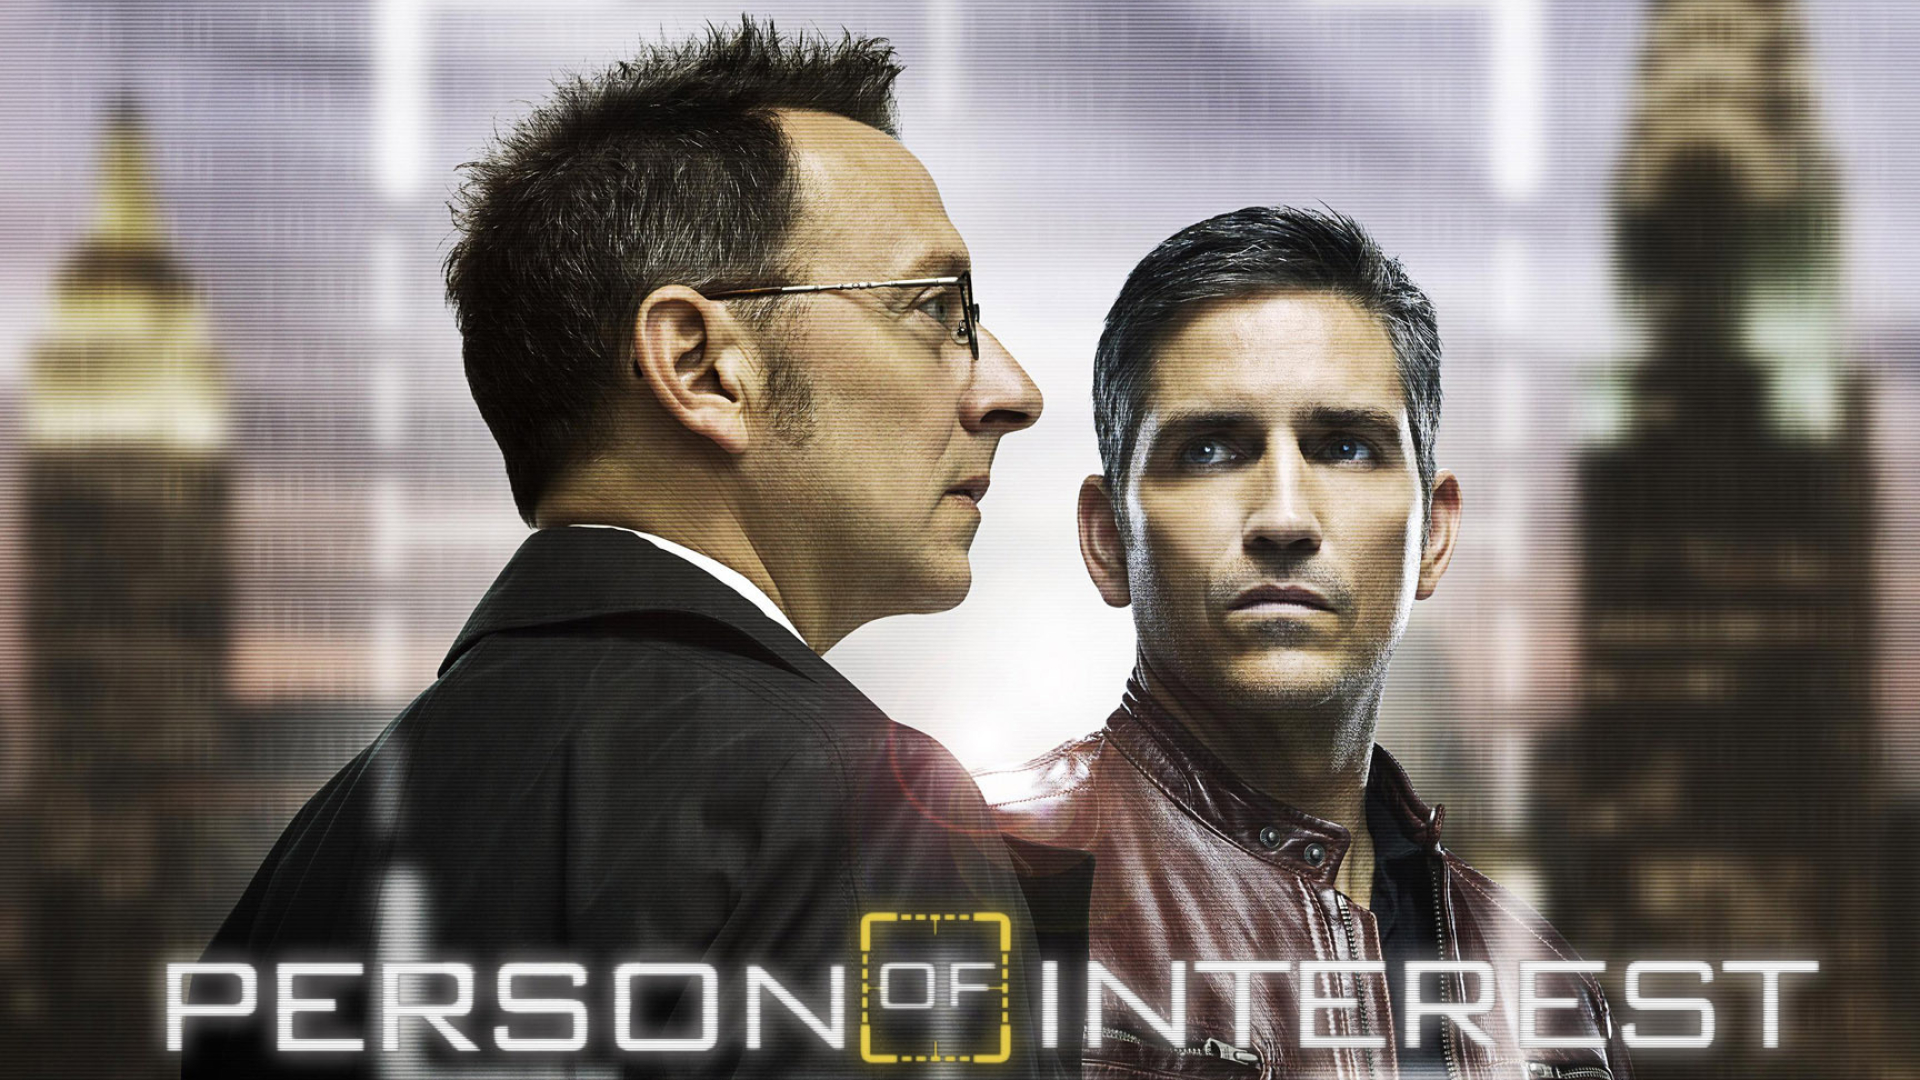 Person of Interest TV series, Free download wallpapers, Intriguing storyline, Must-watch, 1920x1080 Full HD Desktop